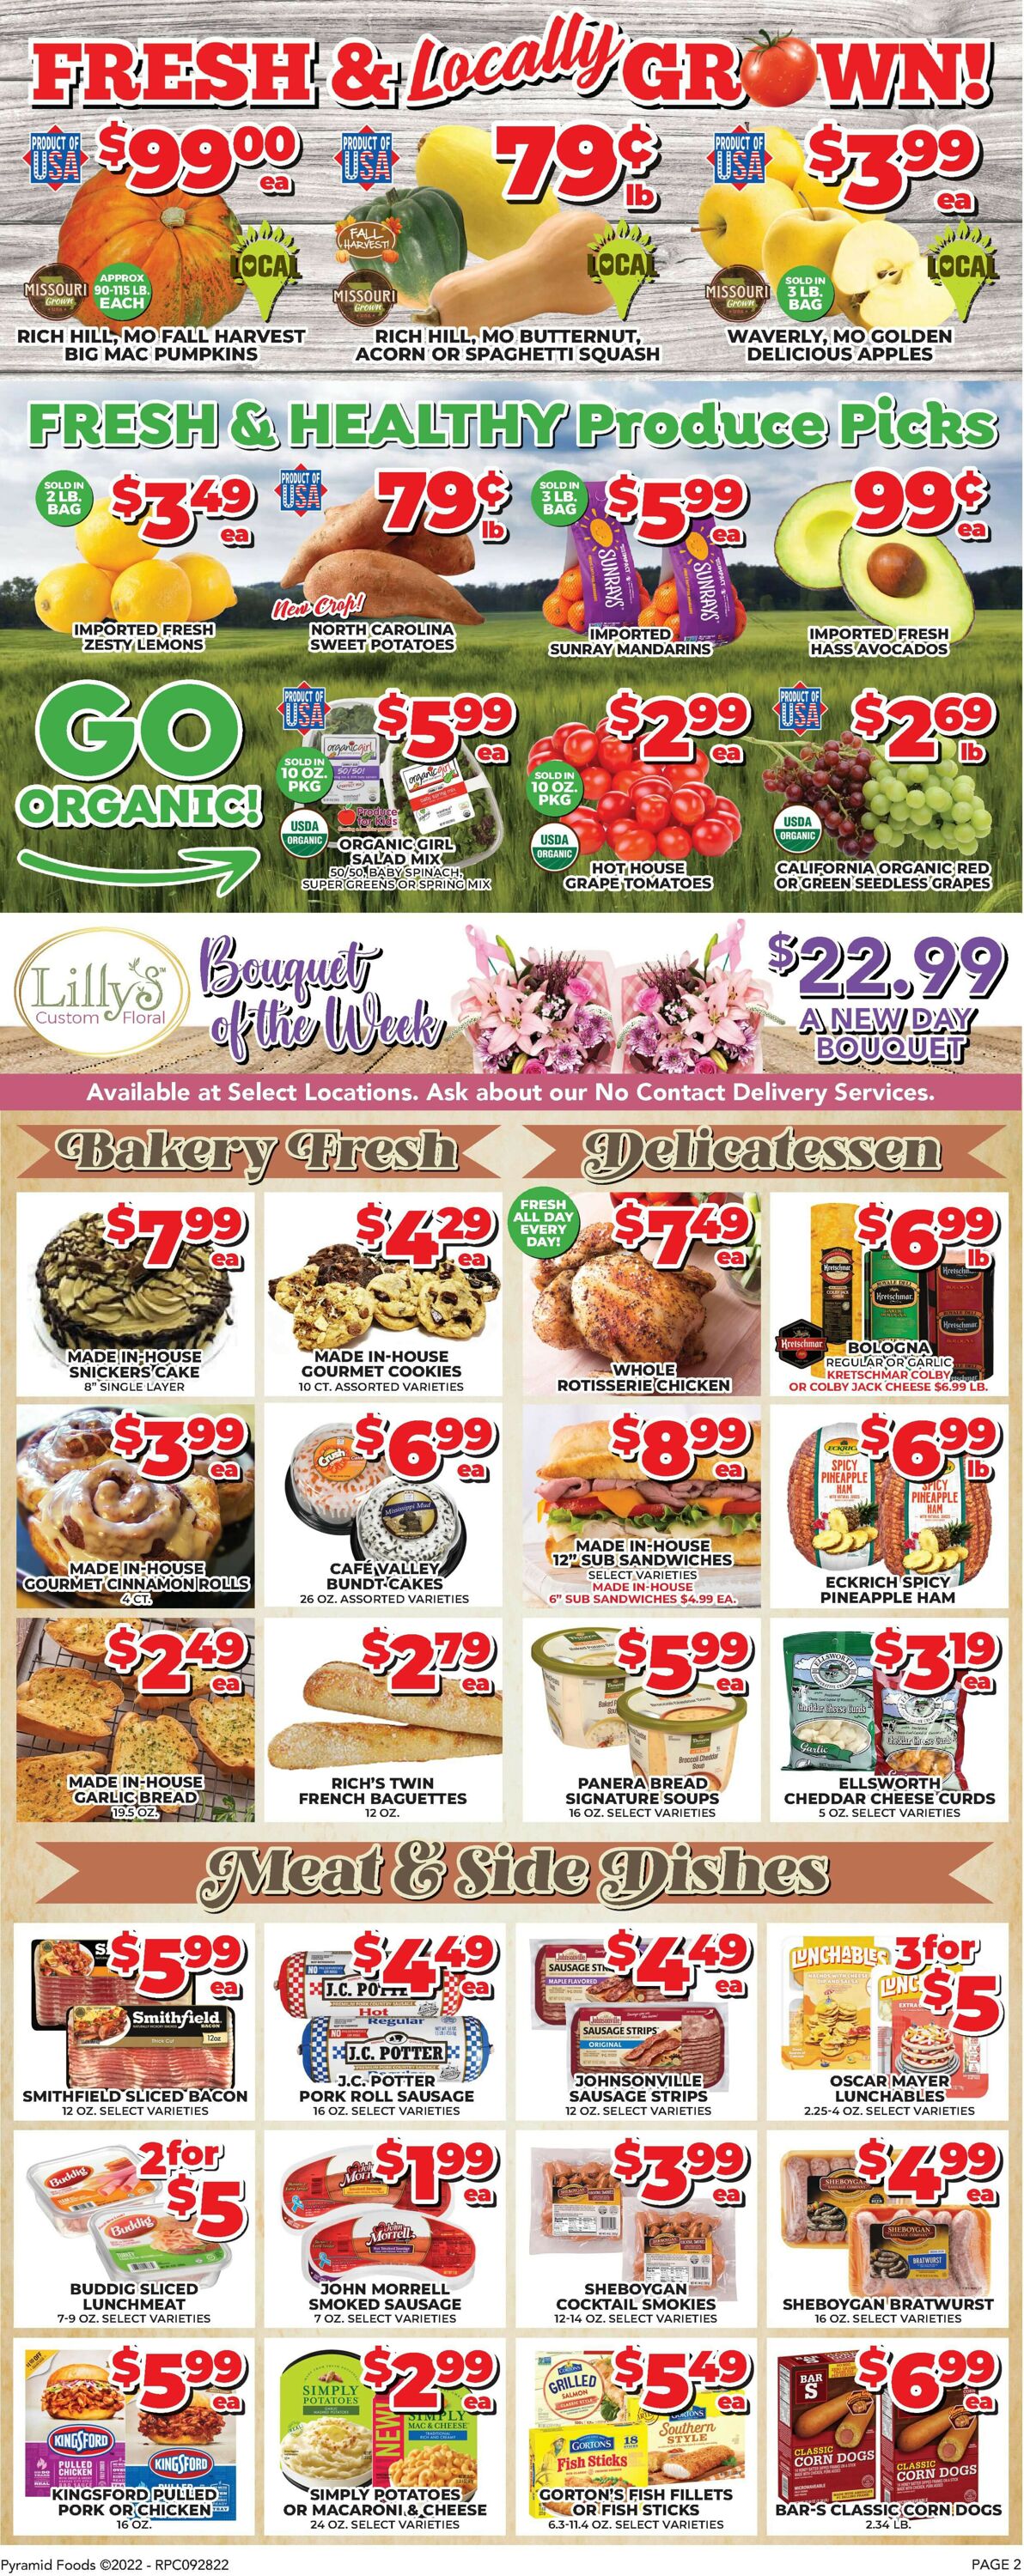 Price Cutter Weekly Ad Circular - valid 09/28-10/04/2022 (Page 2)